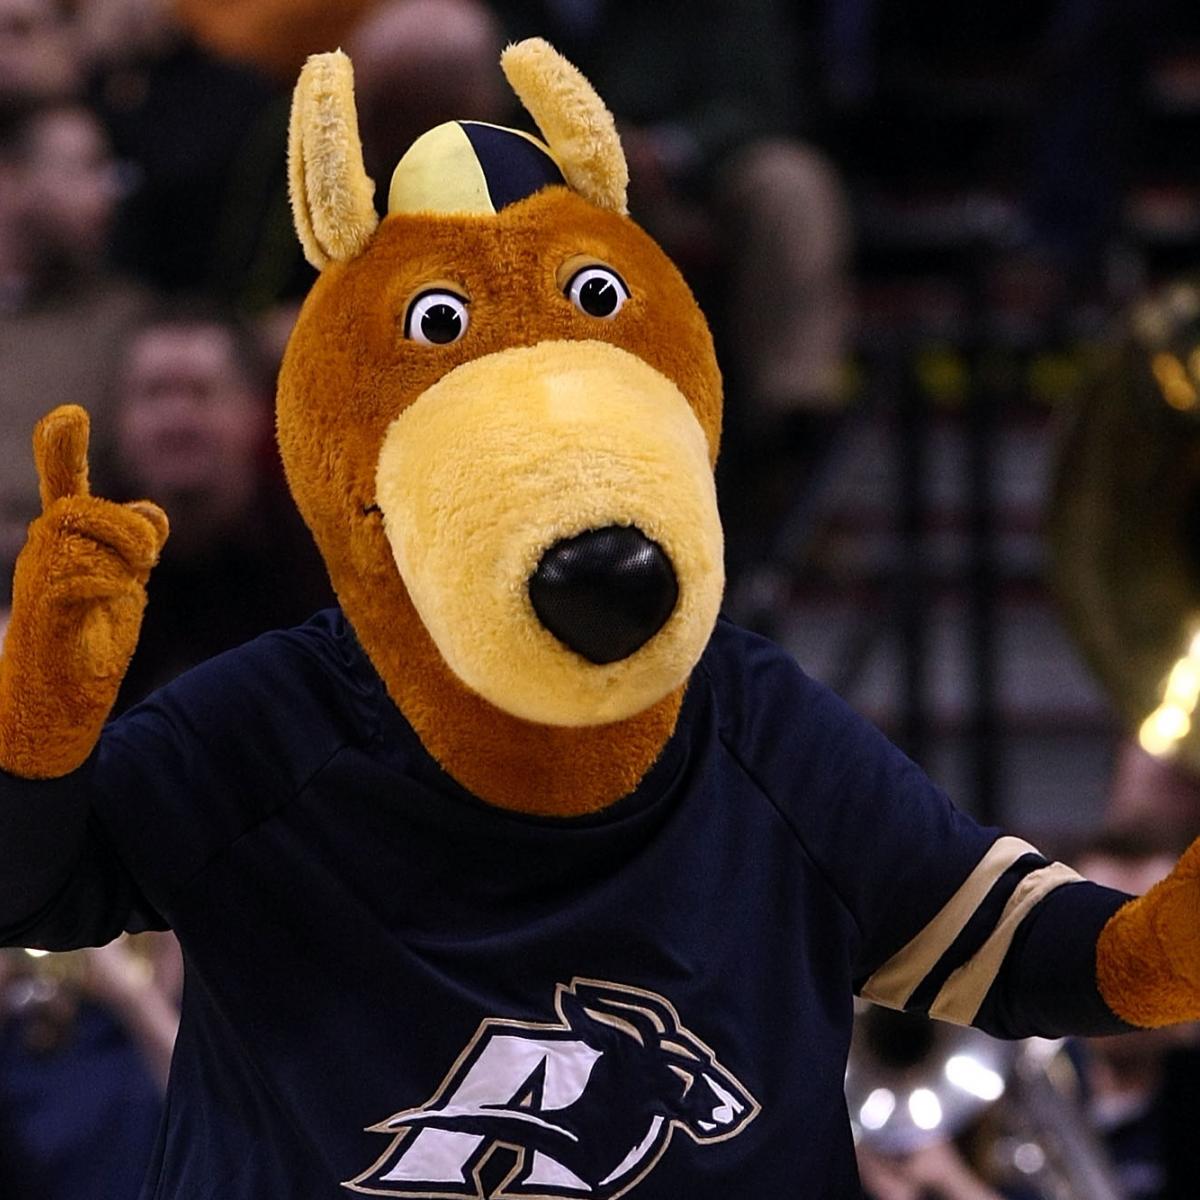 The Akron Zips & D1 College Mascots Nobody Has Ever Seen in Real Life